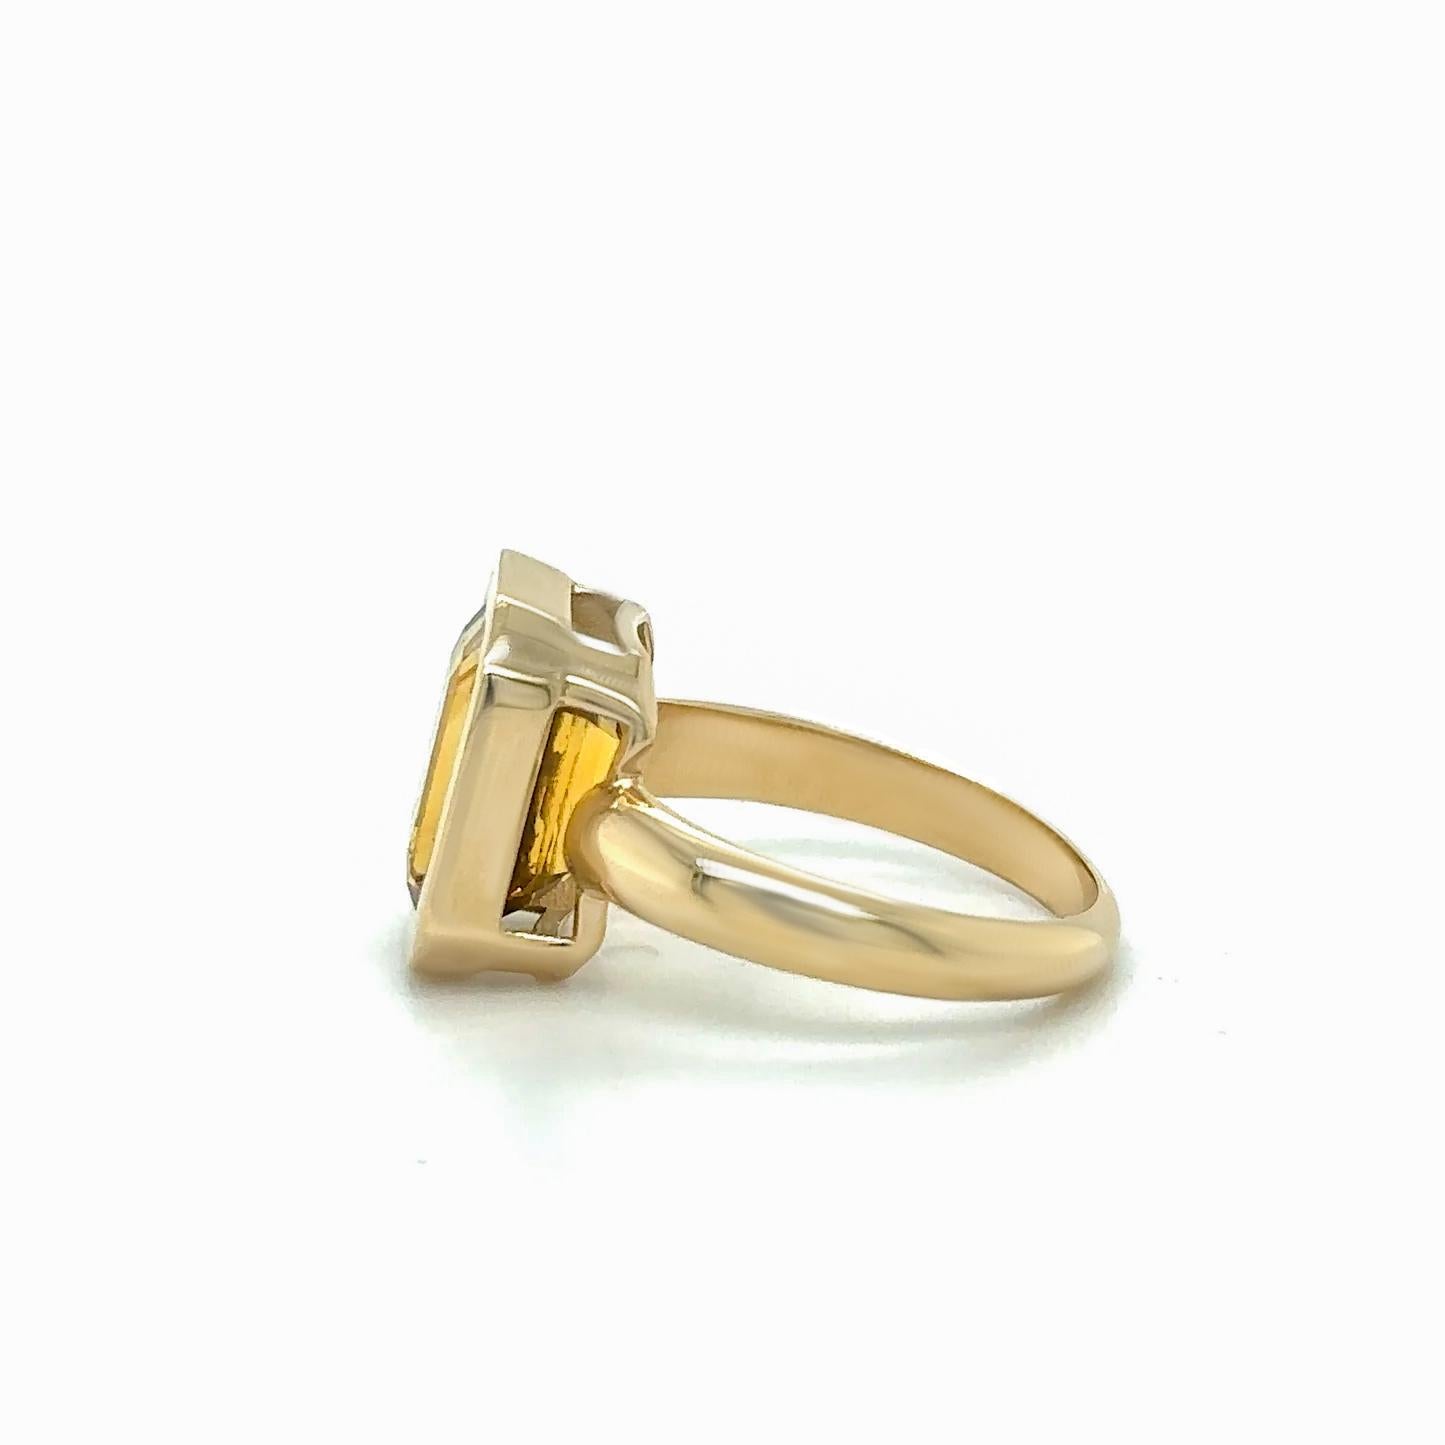 Citrine Bezel Ring 4.40 Carat 14K Yellow Gold In Excellent Condition For Sale In Laguna Niguel, CA